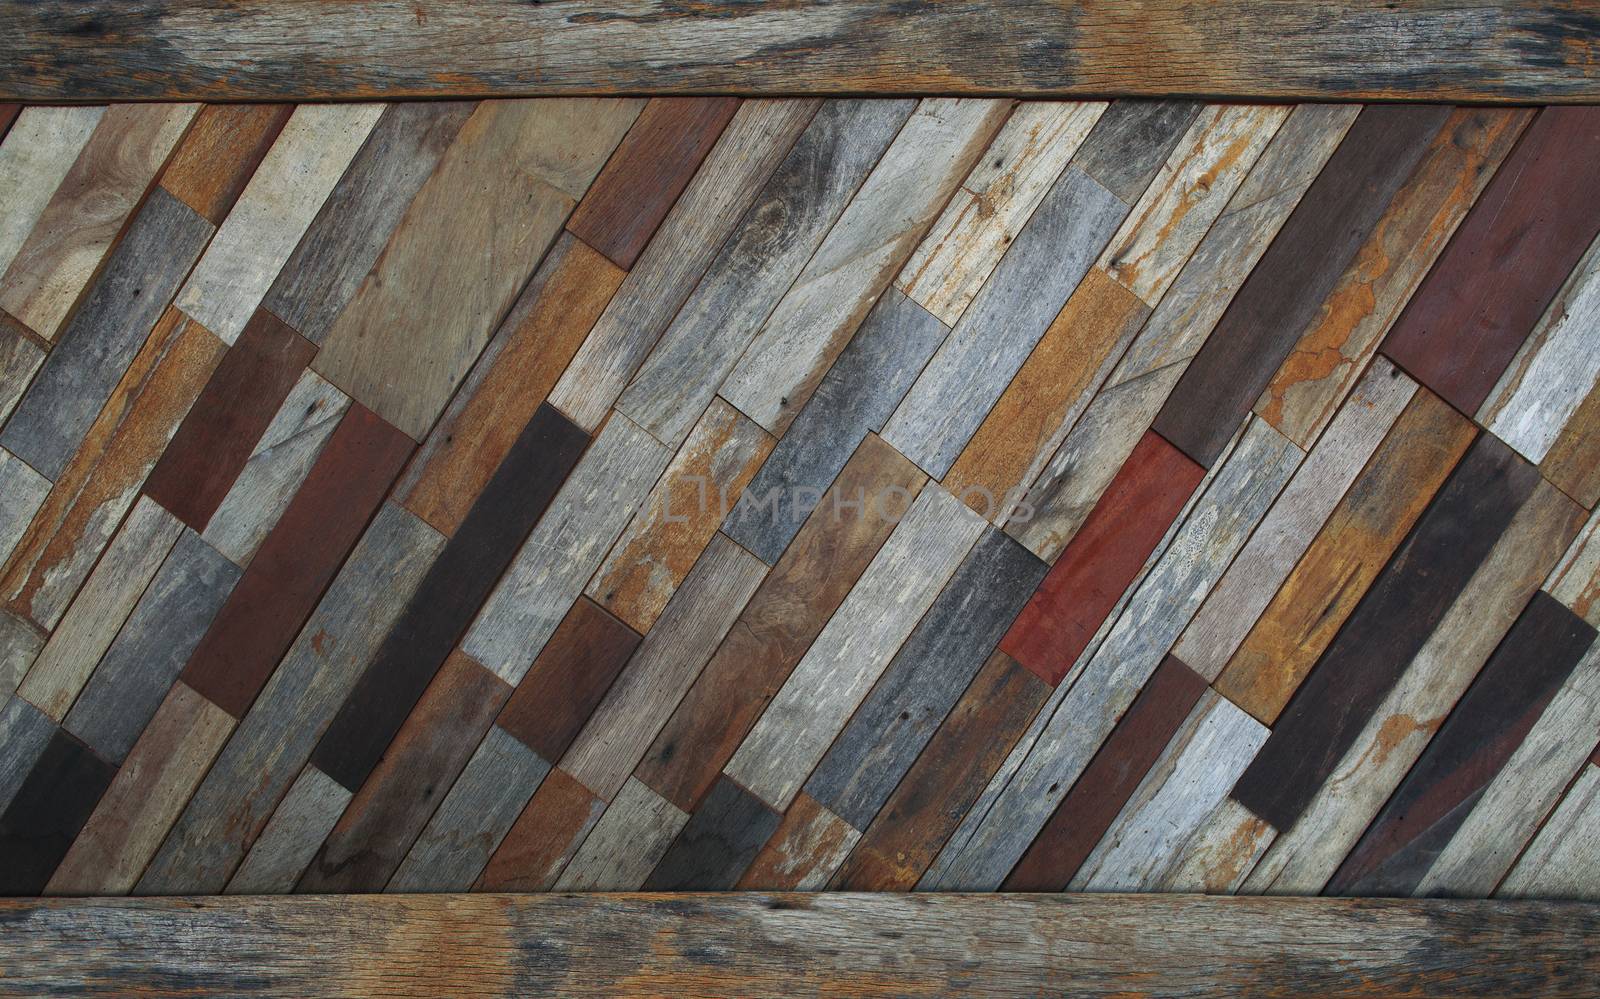 close up textured bark wood pattern arranegment by line and row panel use asr background or backdrop 